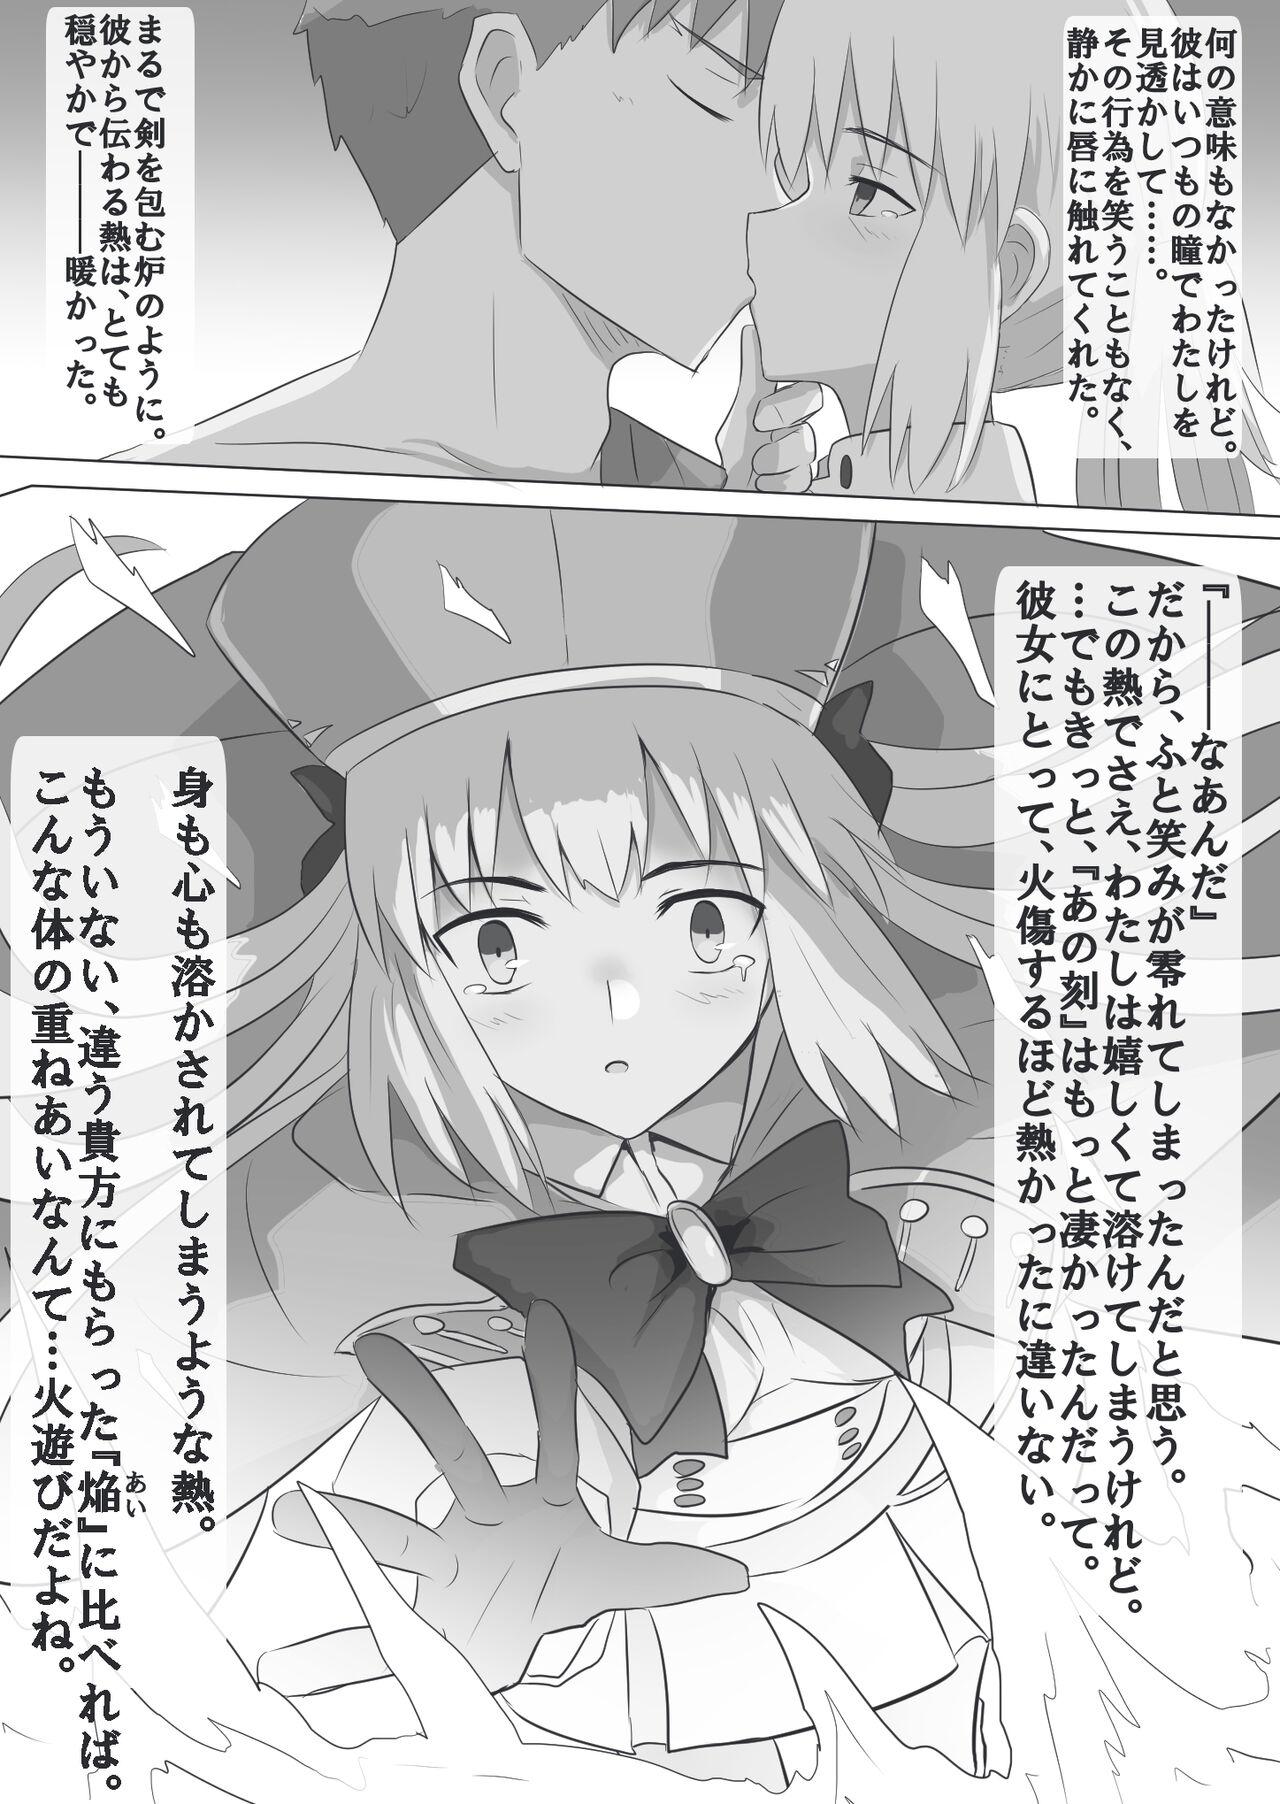 Online MuraCas 7 - Fate grand order Room - Page 4